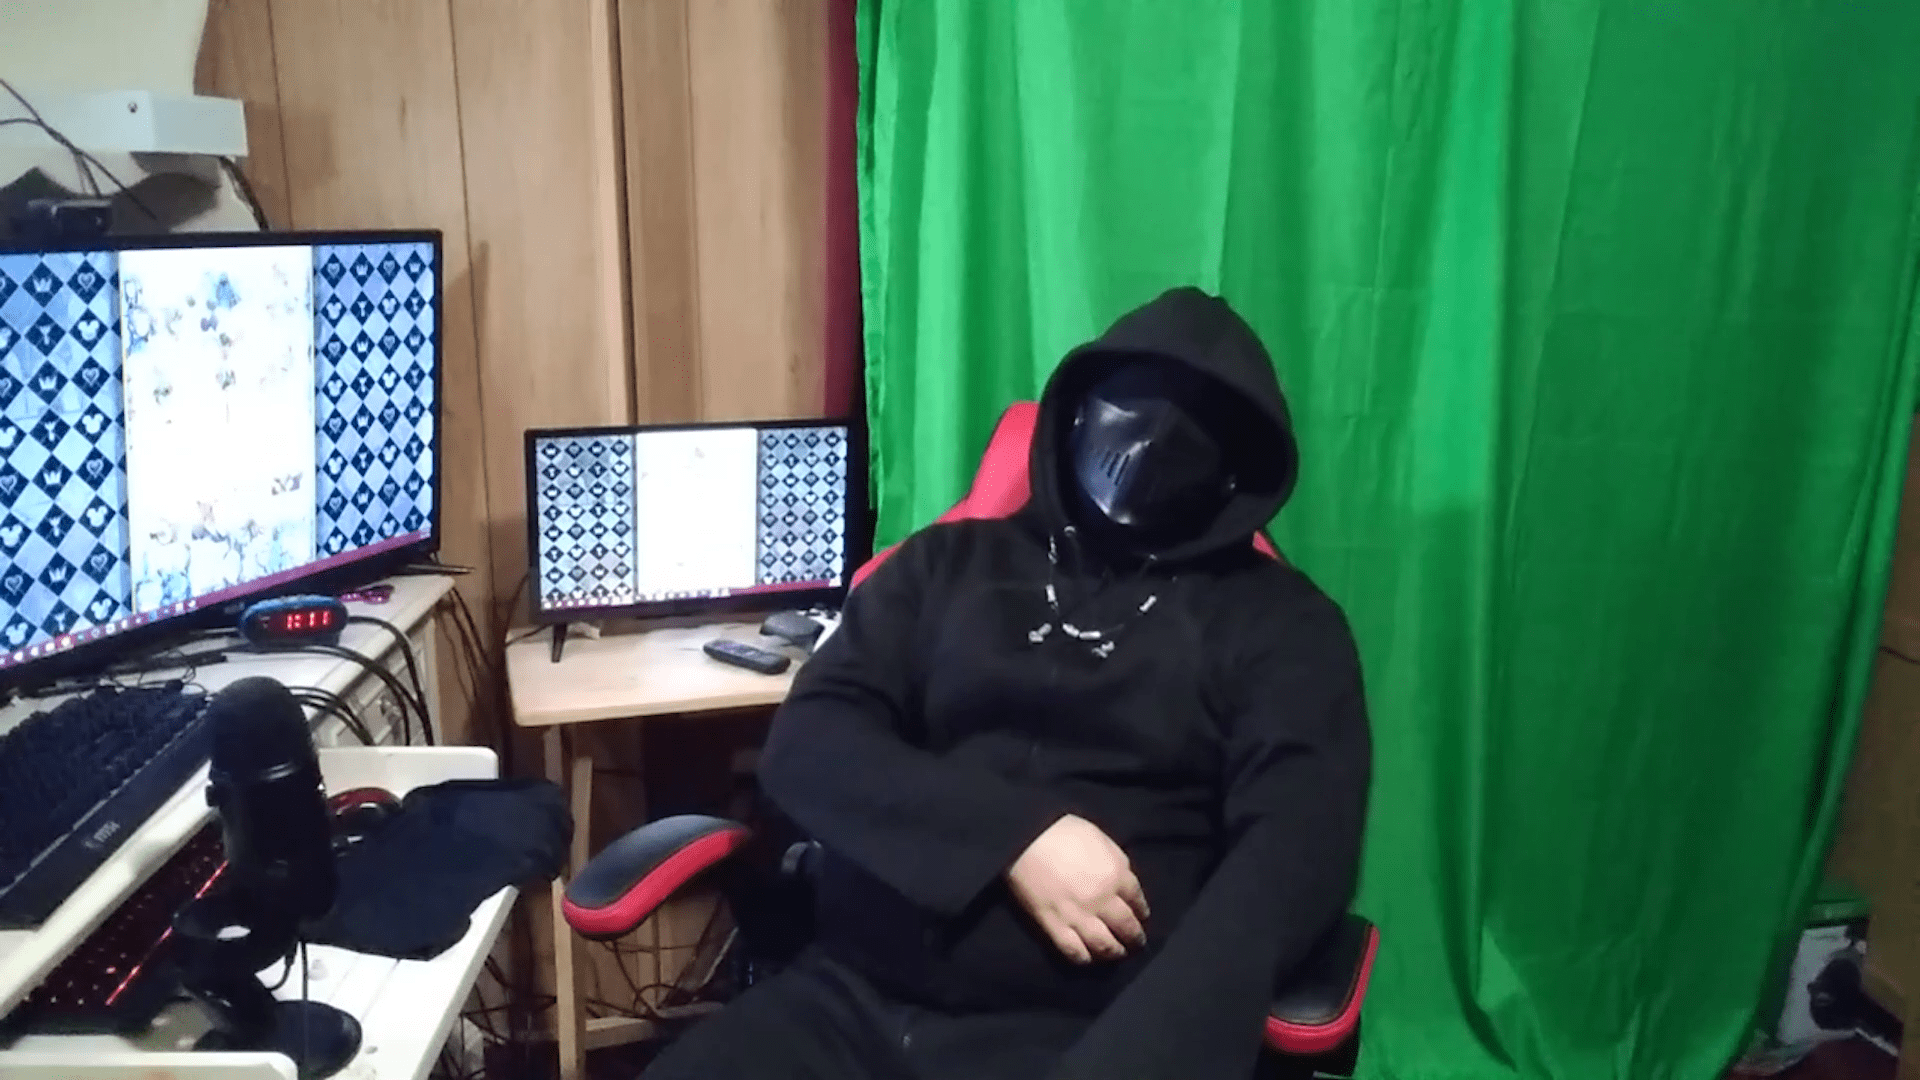 A man in a darth vader costume by a computer